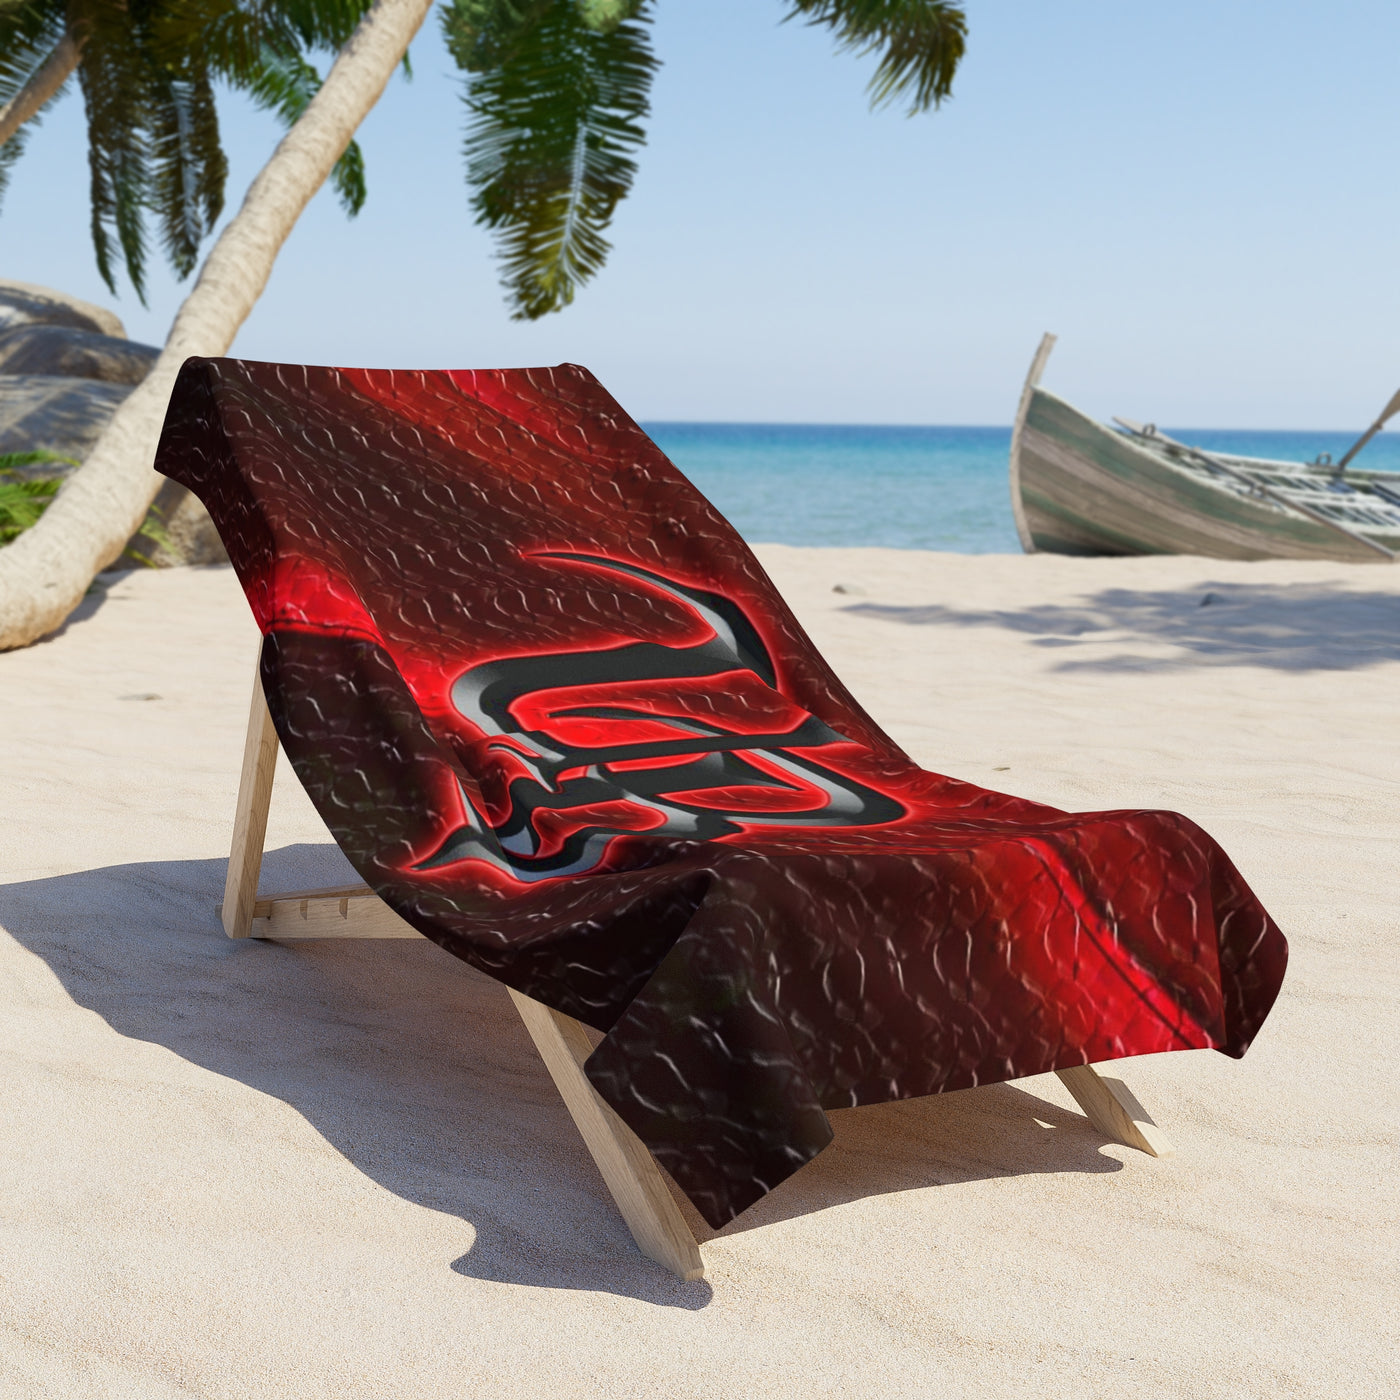  Beach Towel - Large, absorbent towel ideal for use at the beach, poolside, or for outdoor activities, providing comfort and drying convenience.